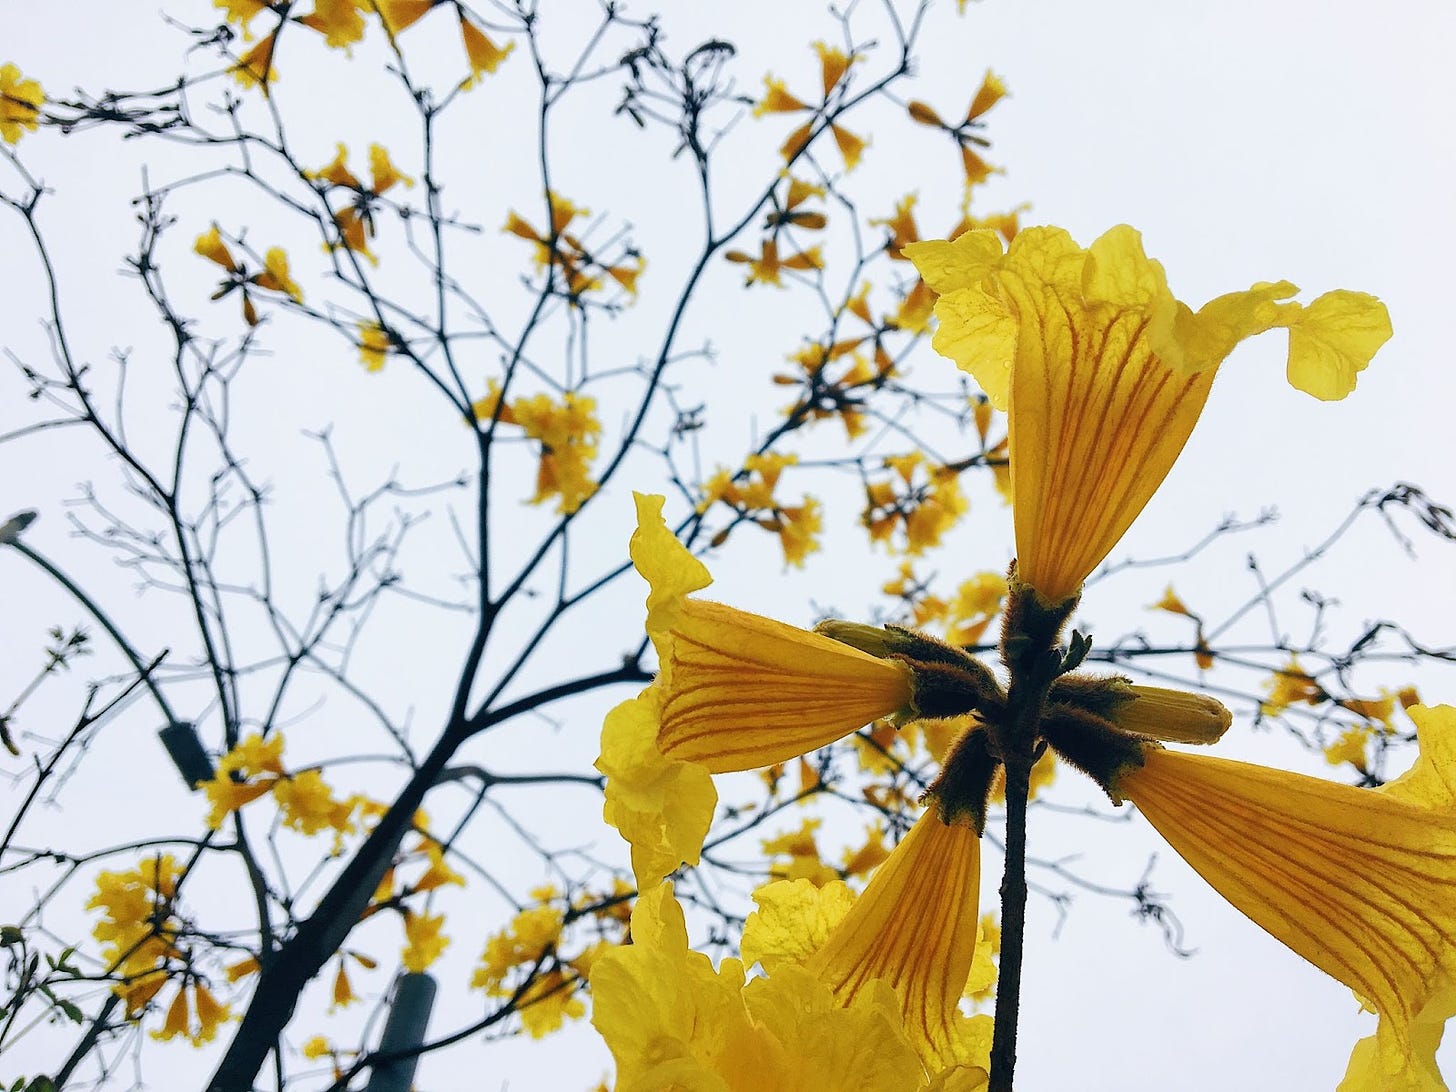 Photo of yellow trumpet flowers sparsely attached to an otherwise bare tree.